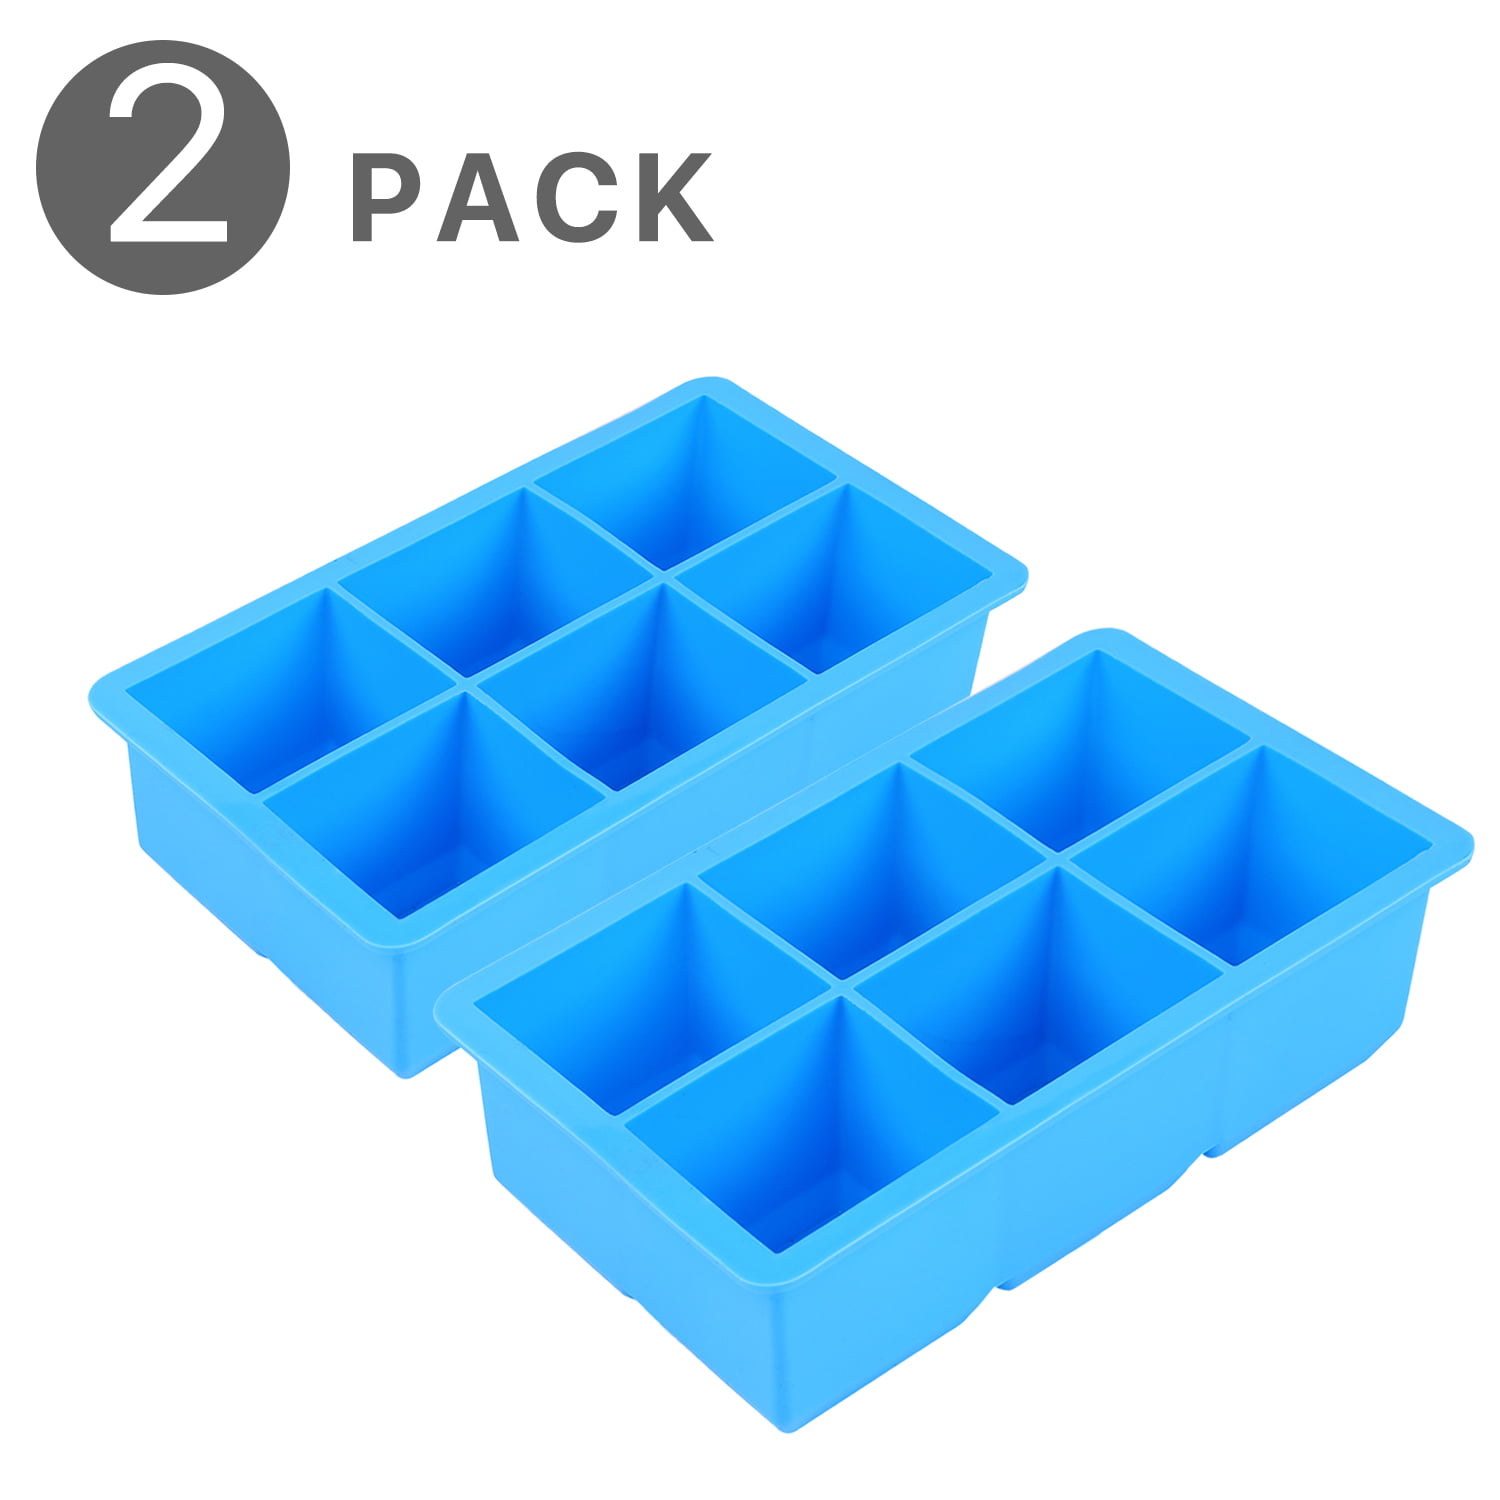 Details about   Big Giant Jumbo Large Size Silicone Ice Cube Mould Square Mold Tray DIY Maker`US 